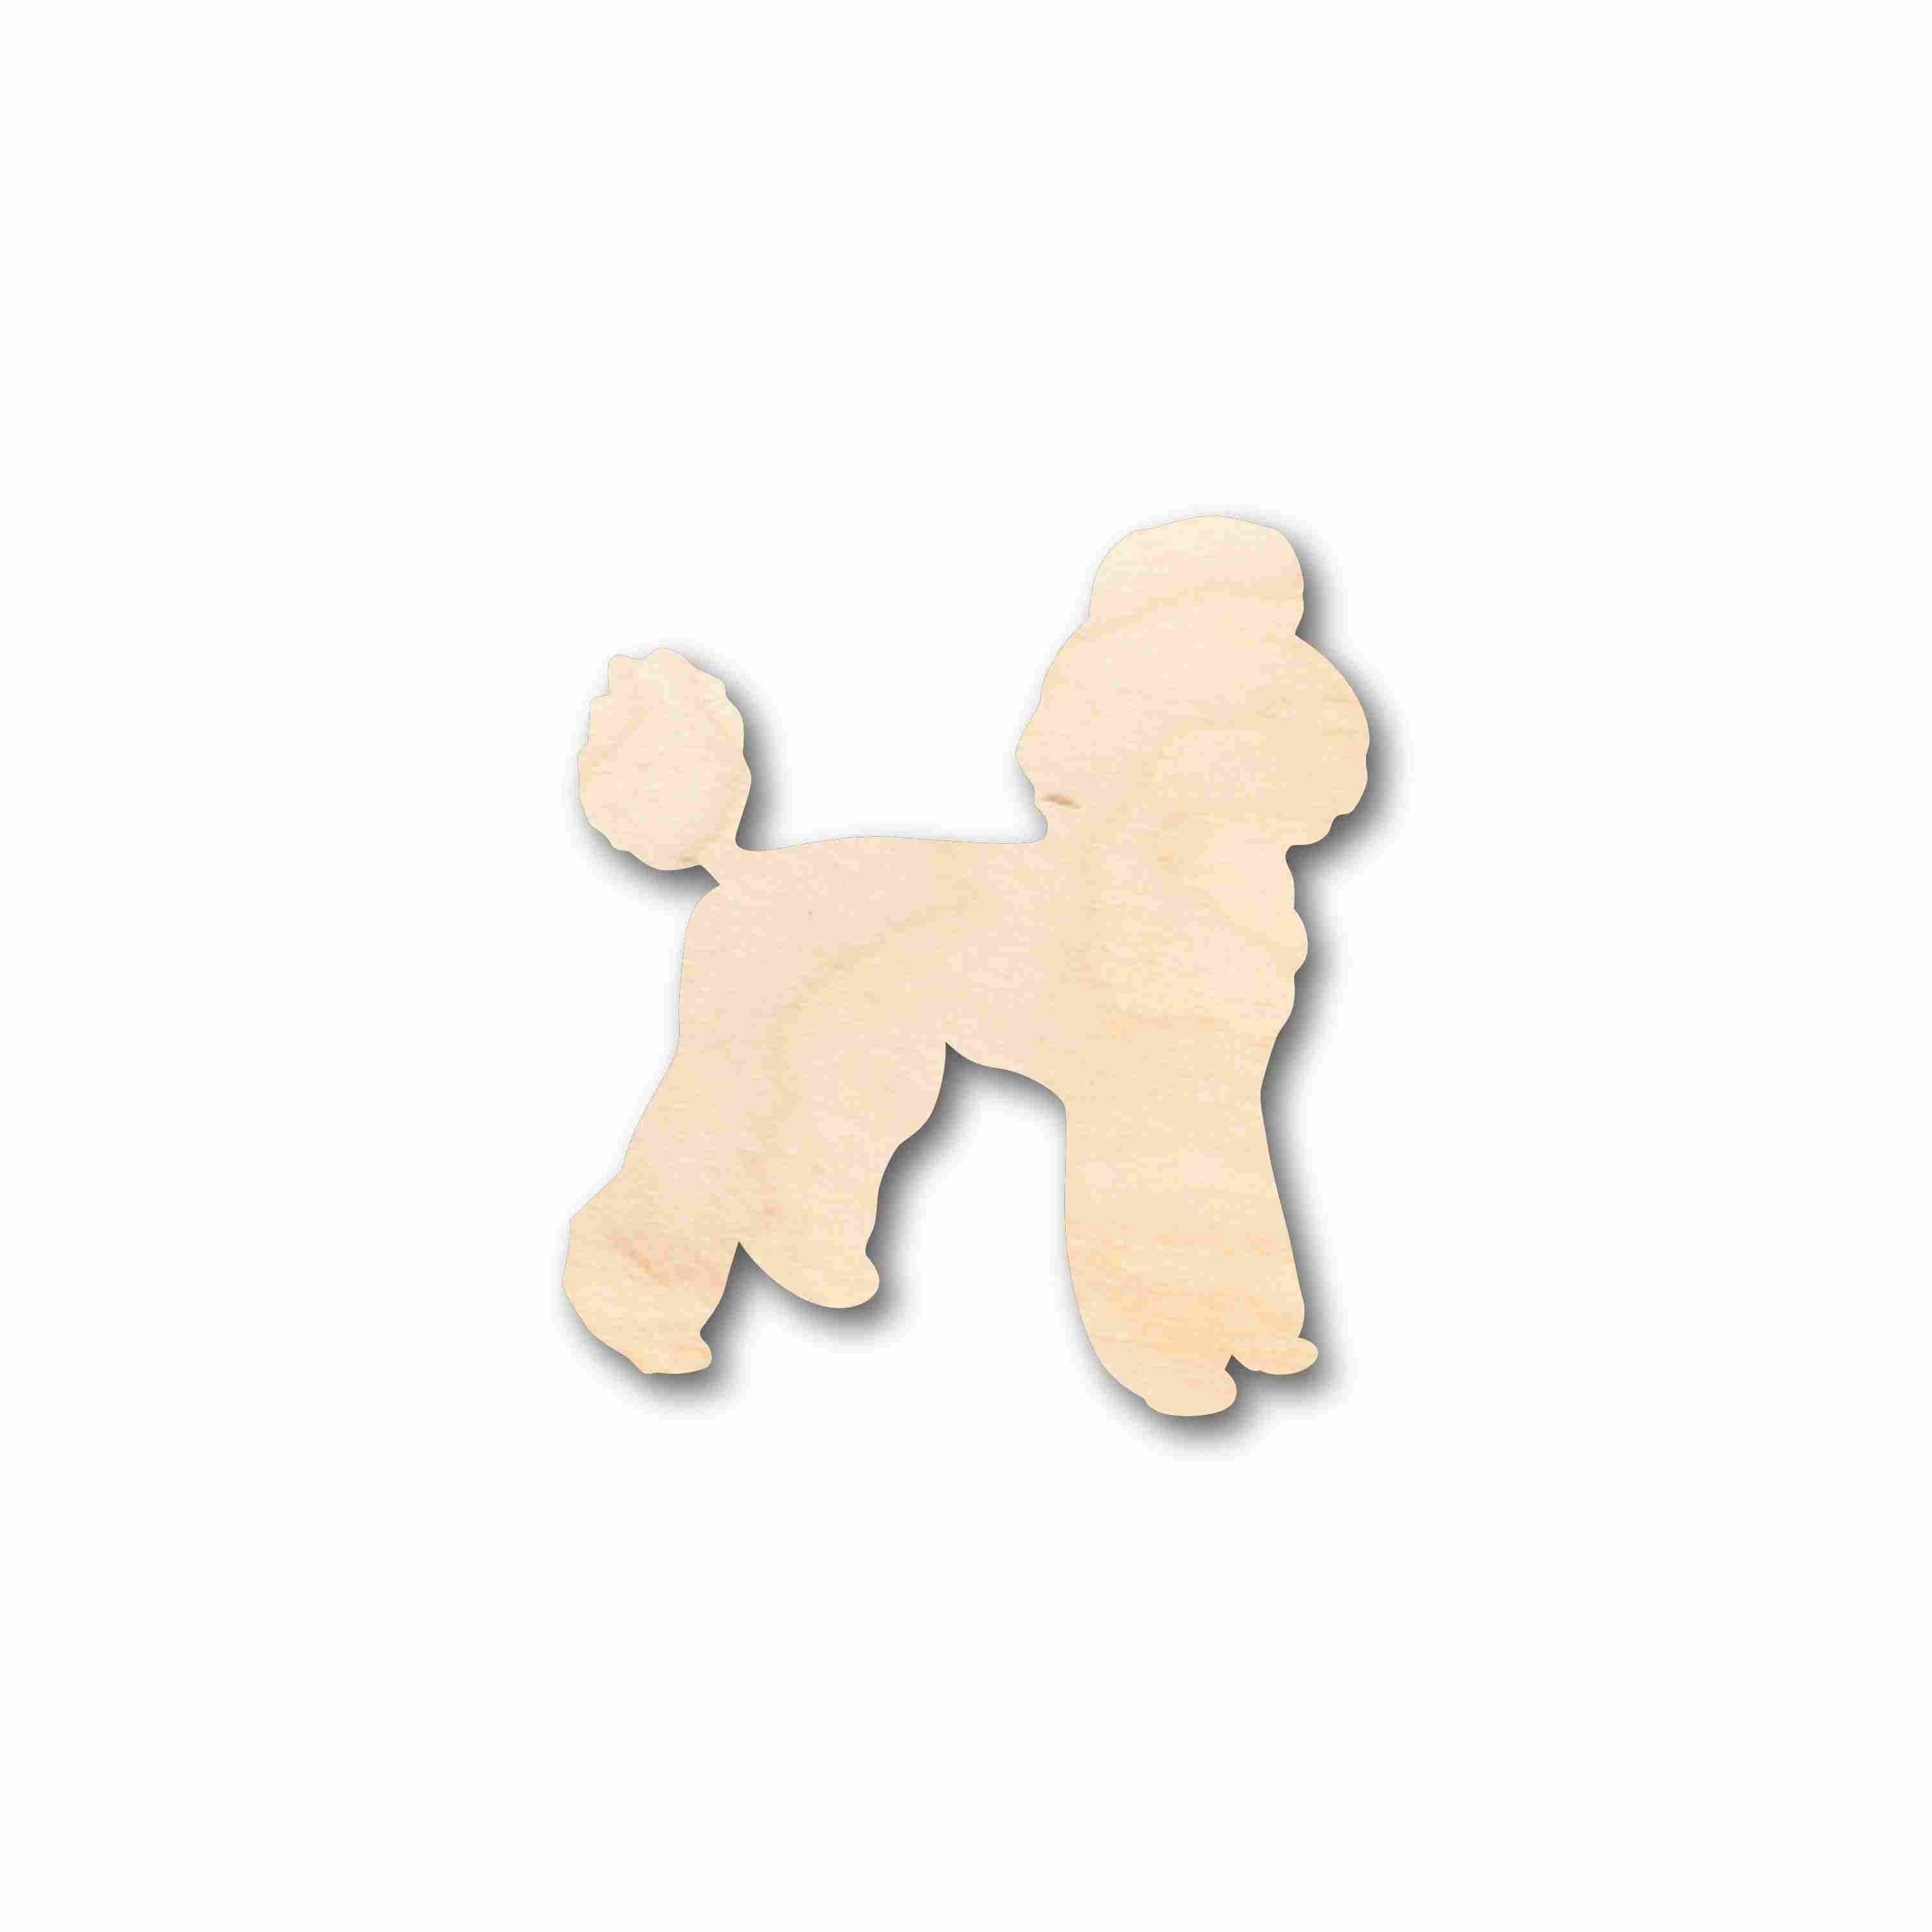 Unfinished Wood Poodle Dog Silhouette - Craft- up to 24